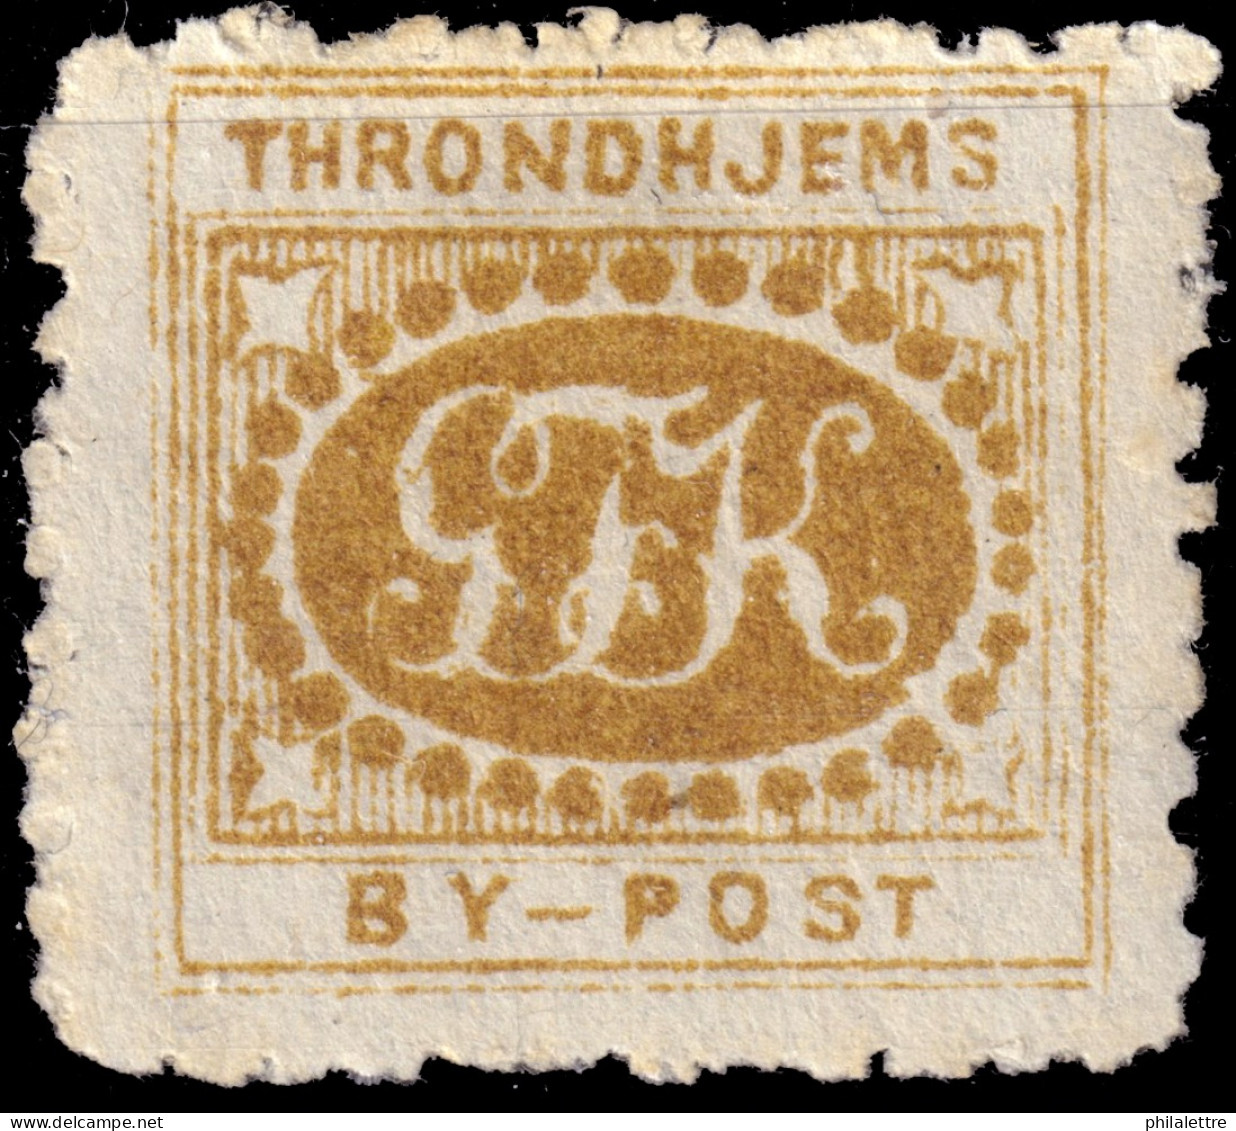 NORVÈGE / NORWAY - Braekstad Local Post TRONDHJEM (Trondheim) 1sk Ochre No O/P, Perf. (type 4 Reprint, 1872) - Mint* - Emissions Locales